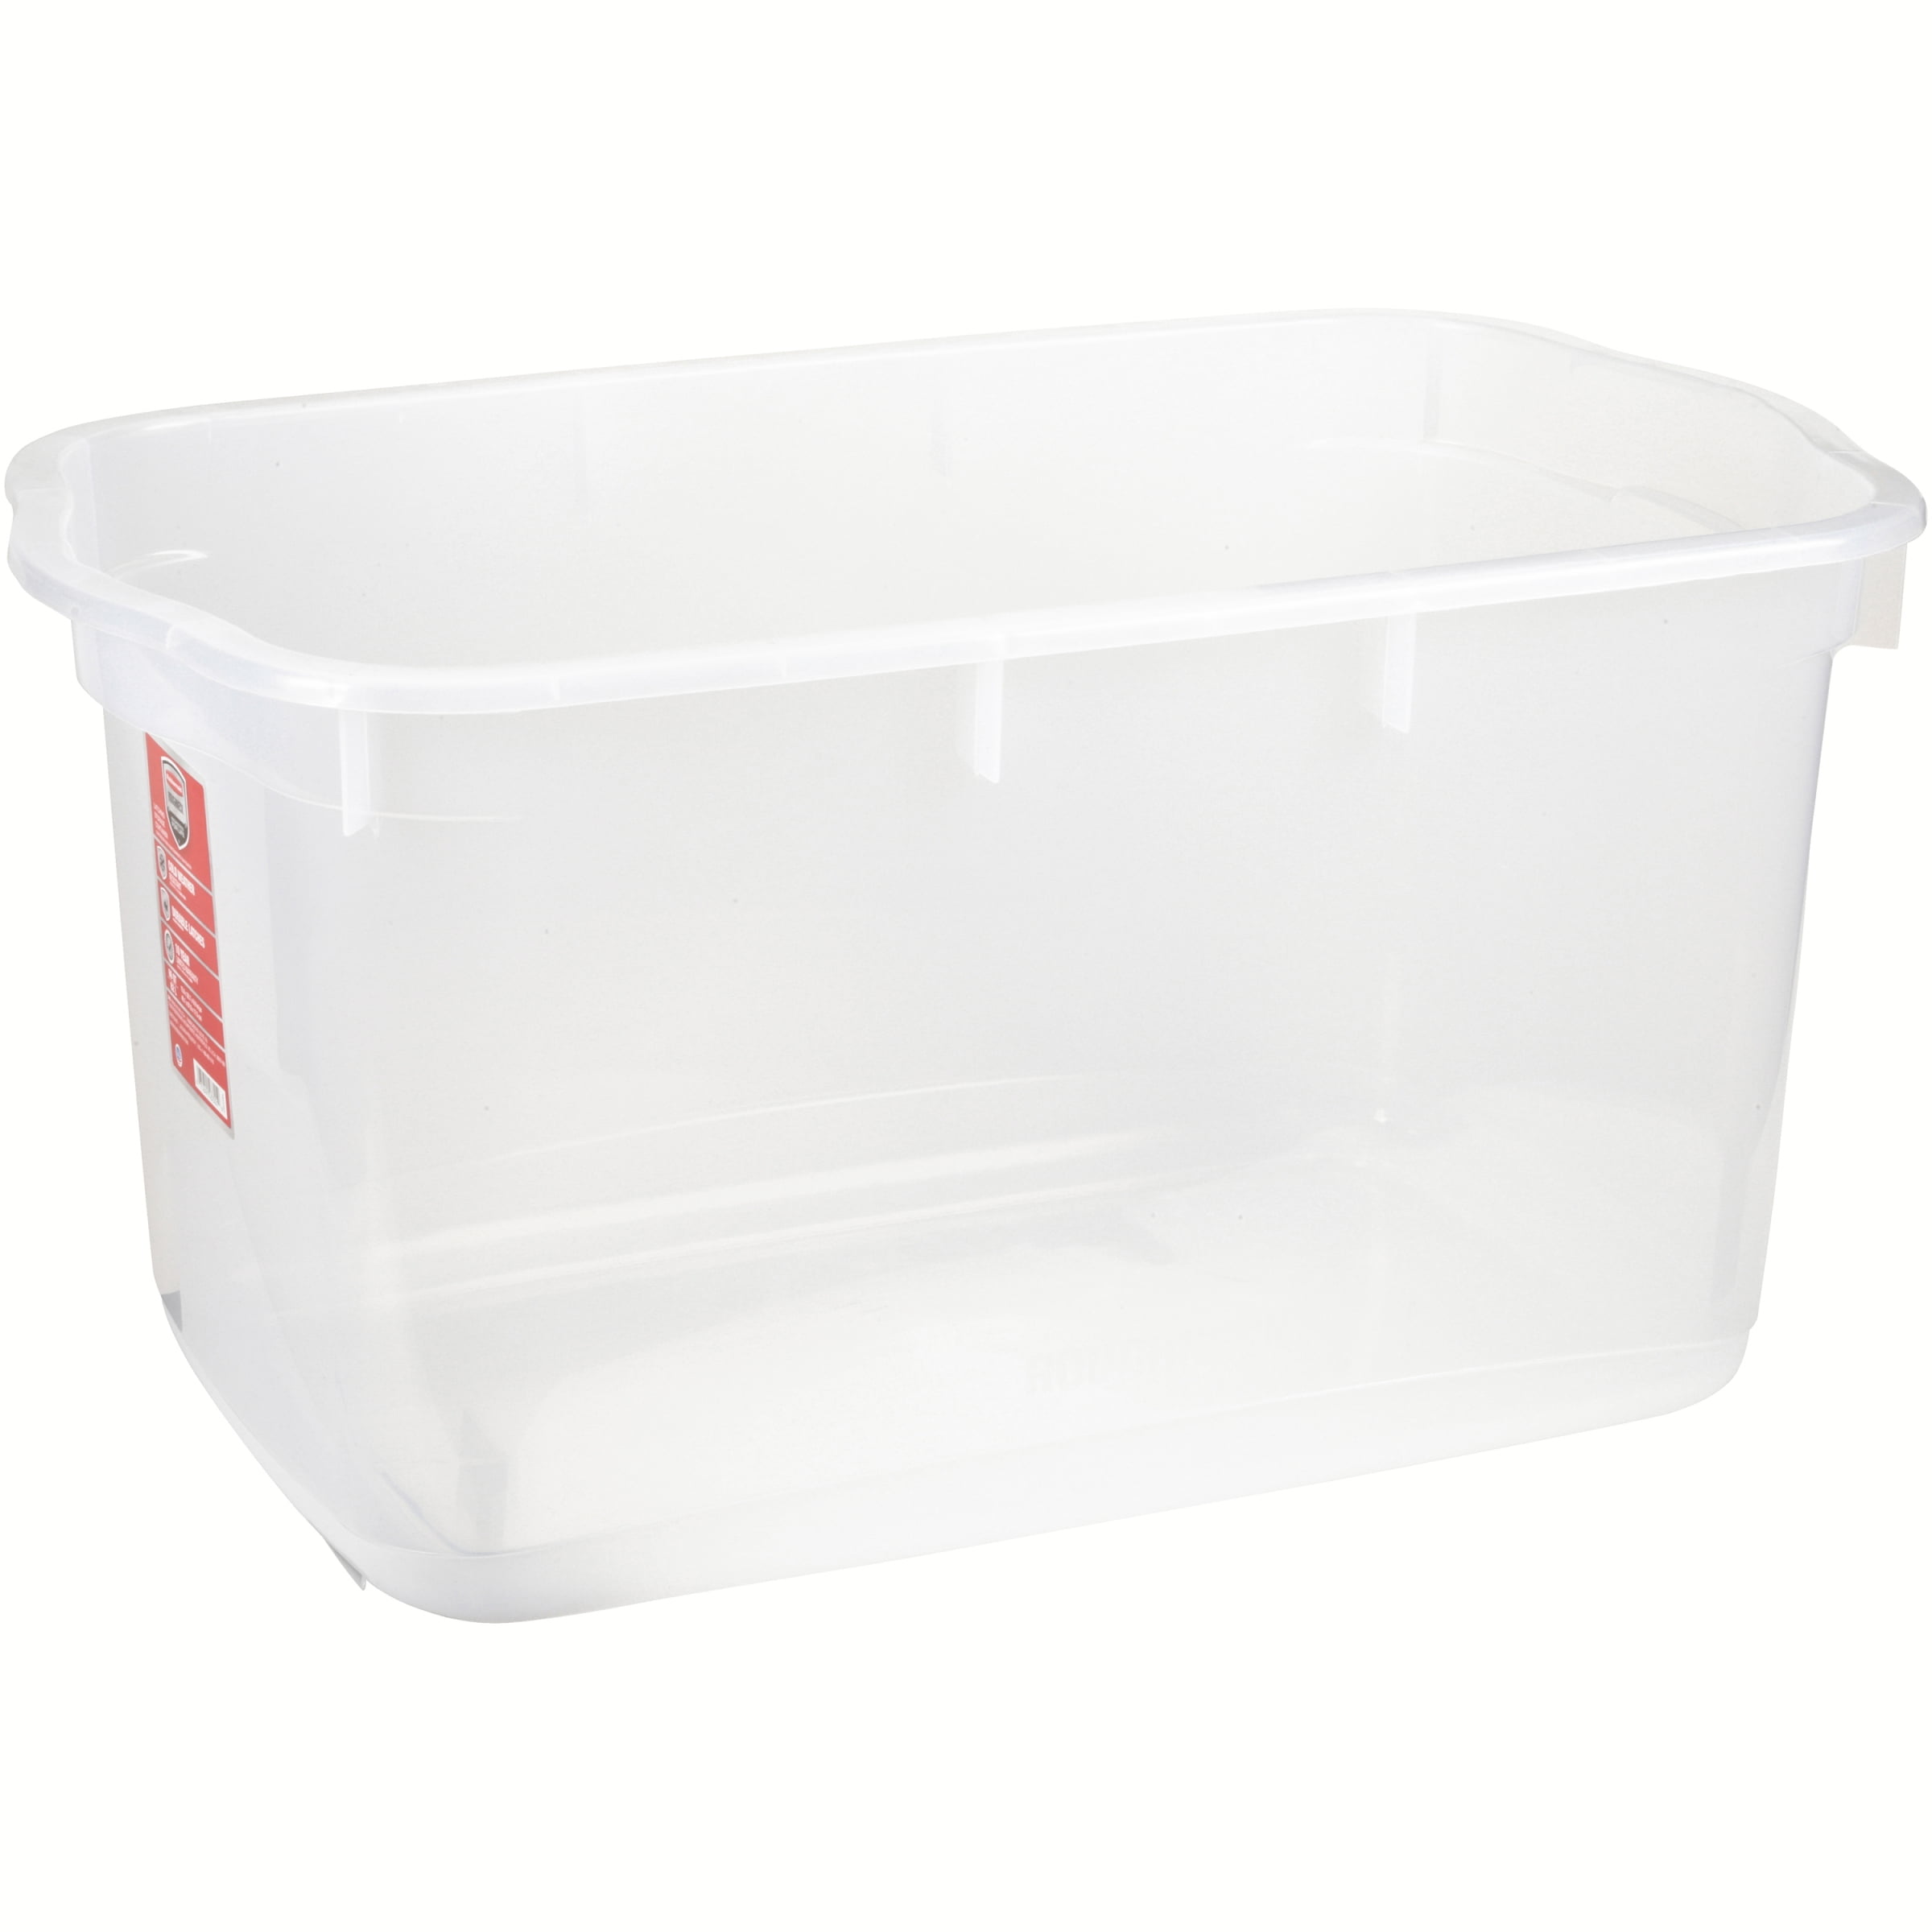 Rubbermaid Roughneck Clear 31 Qt/ 7.75 Gal Storage Containers, Pack of 6  with Snap-Fit Grey Lids, Visible Base, Sturdy and Stackable, Great for